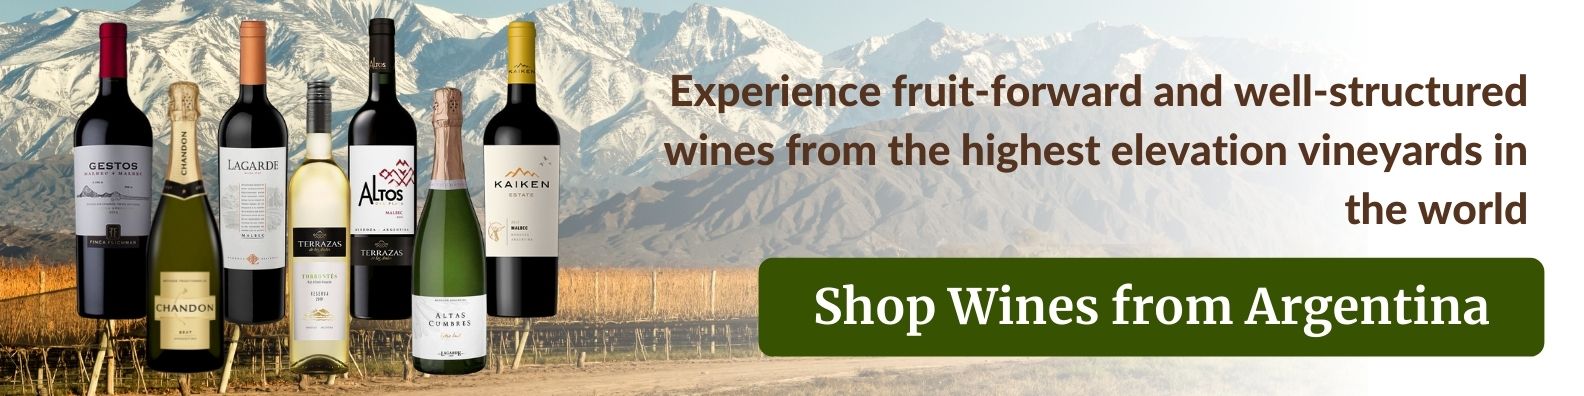 shop great value argentina wines at some of the best prices in the philippines